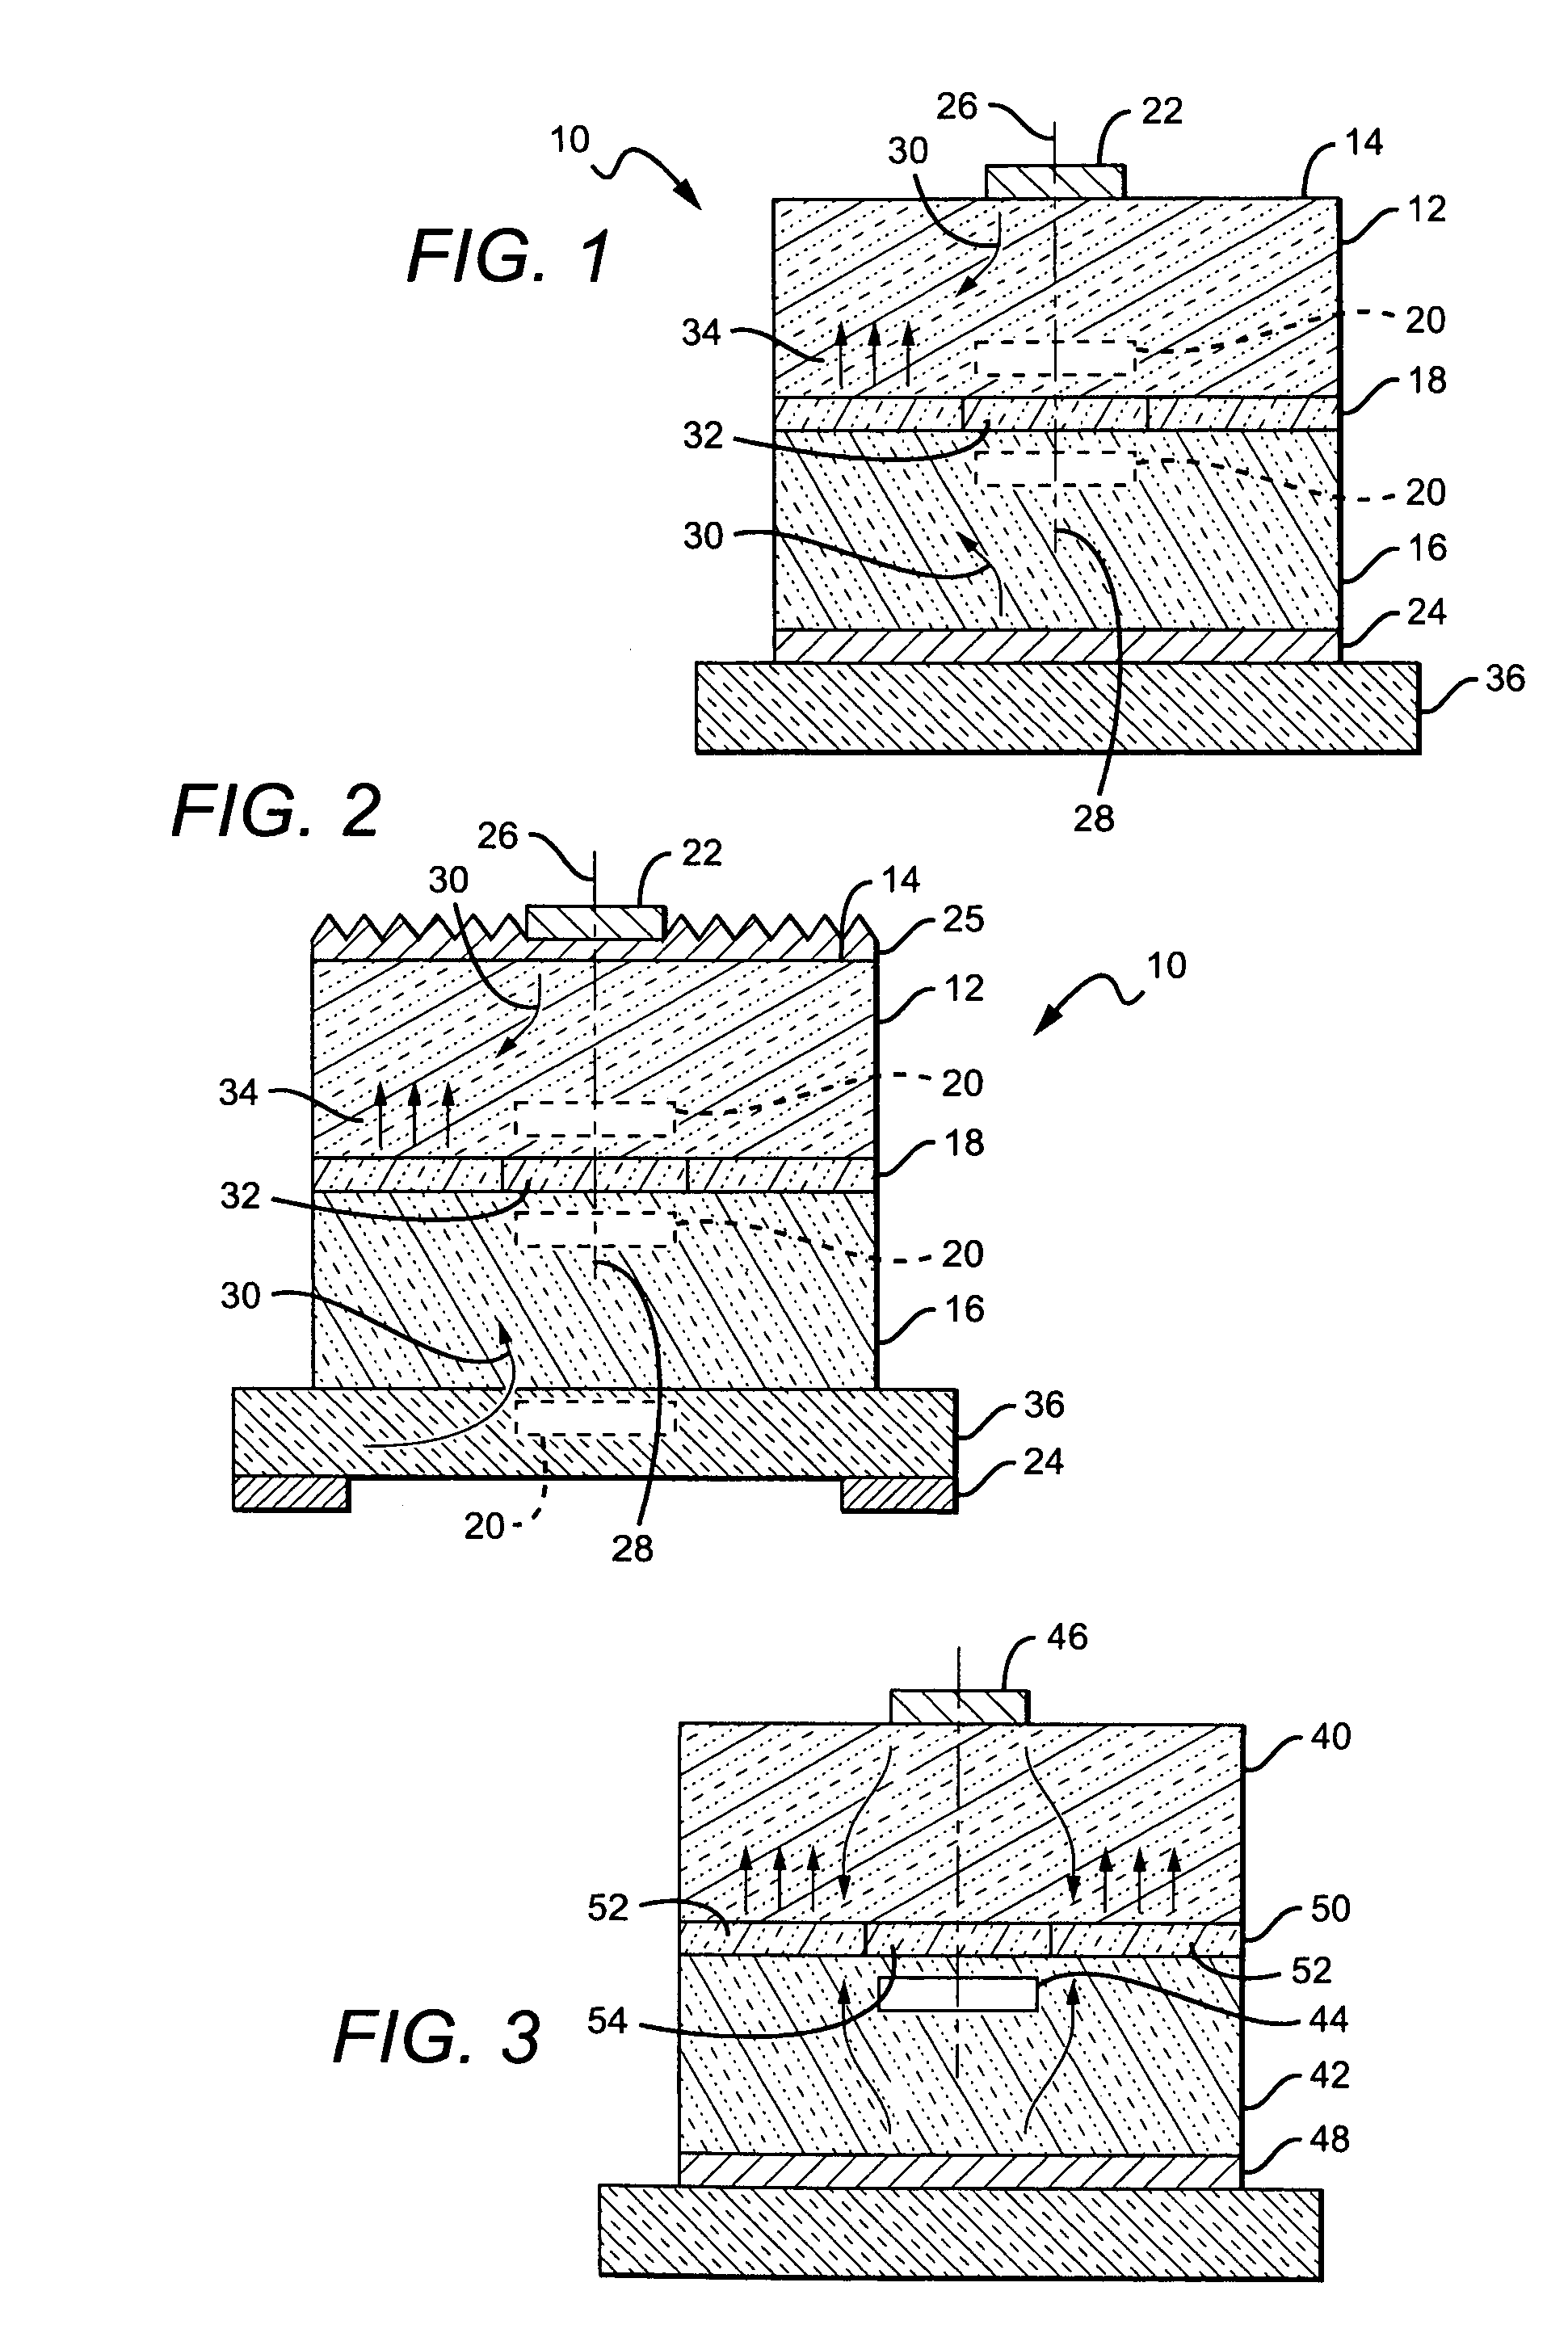 LED with current confinement structure and surface roughening